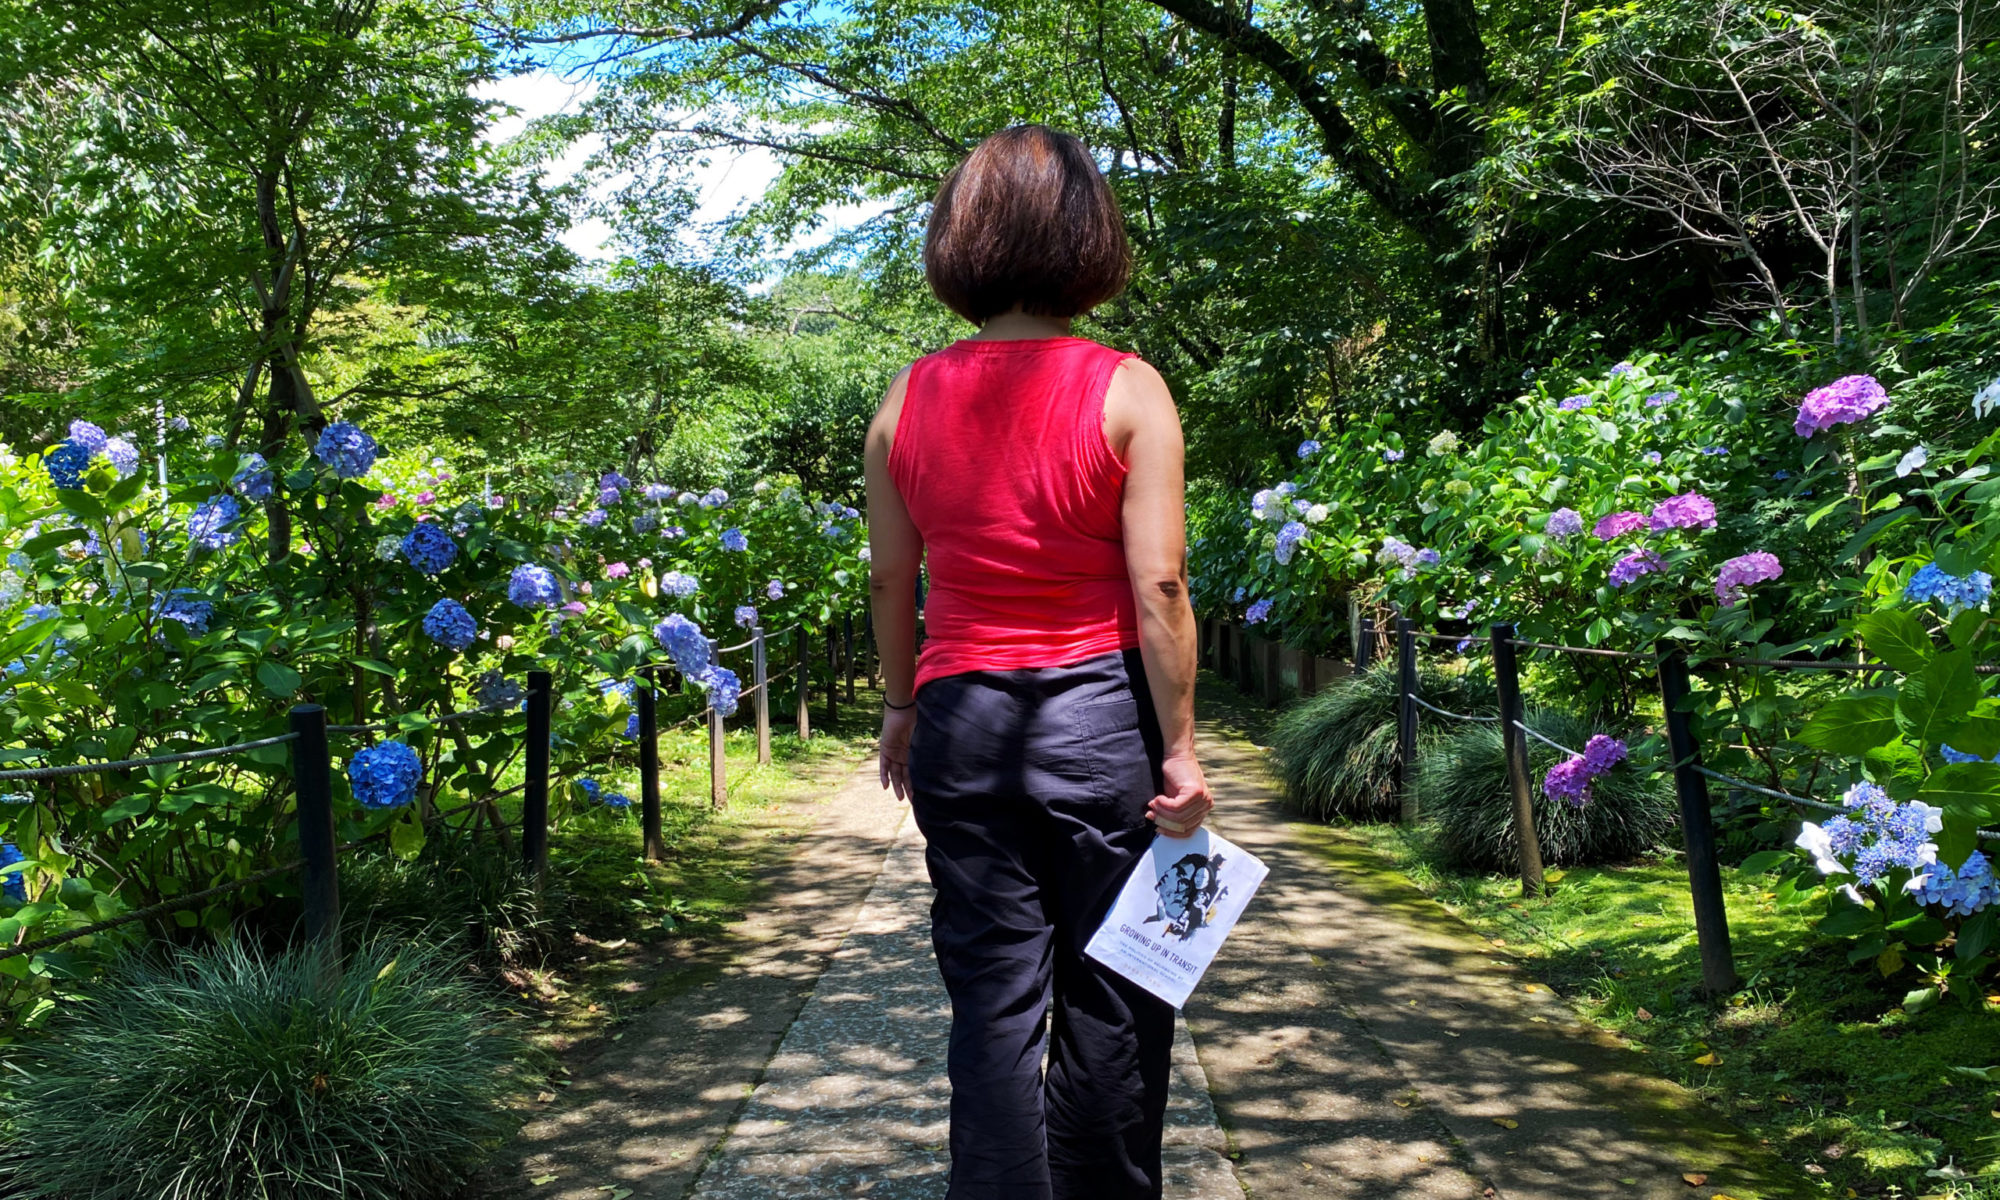 Woman in red sleeveless top and black cargo pants walking in a temple garden full of hydrangeas on either side holding a copy of Growing Up in Transit in her right hand.